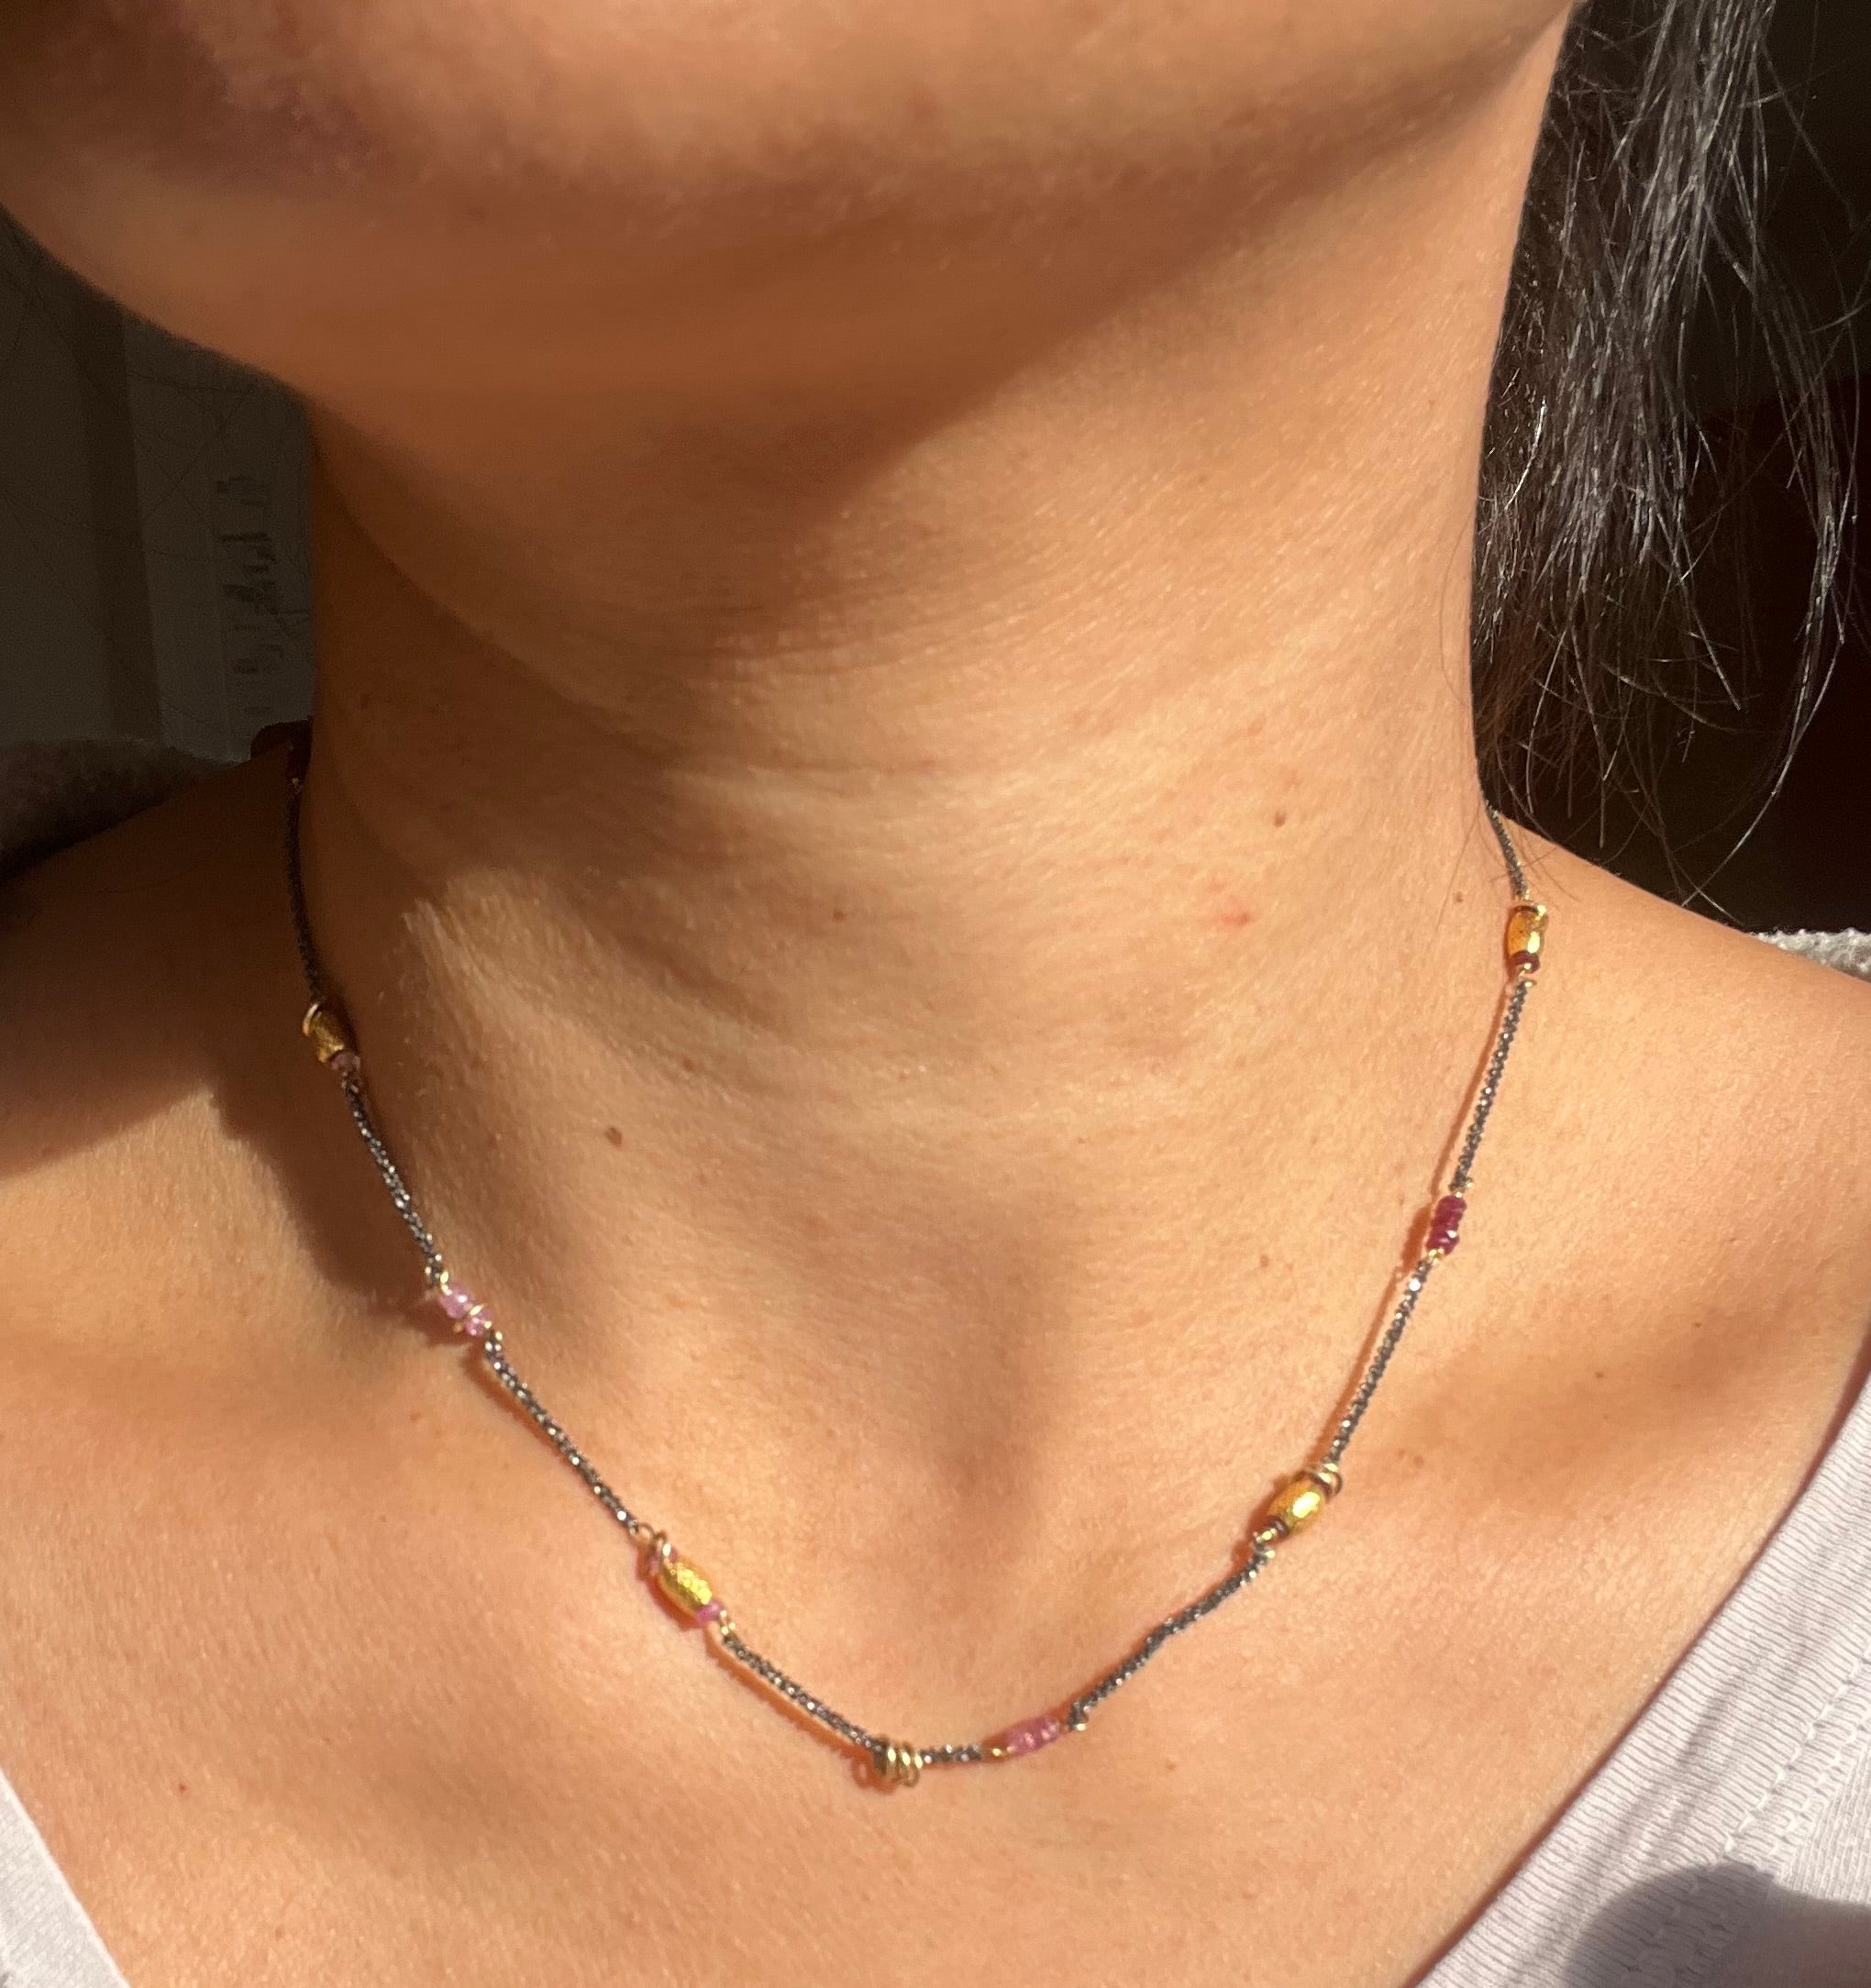 Eclipse Necklace - Ruby in 18k gold bead